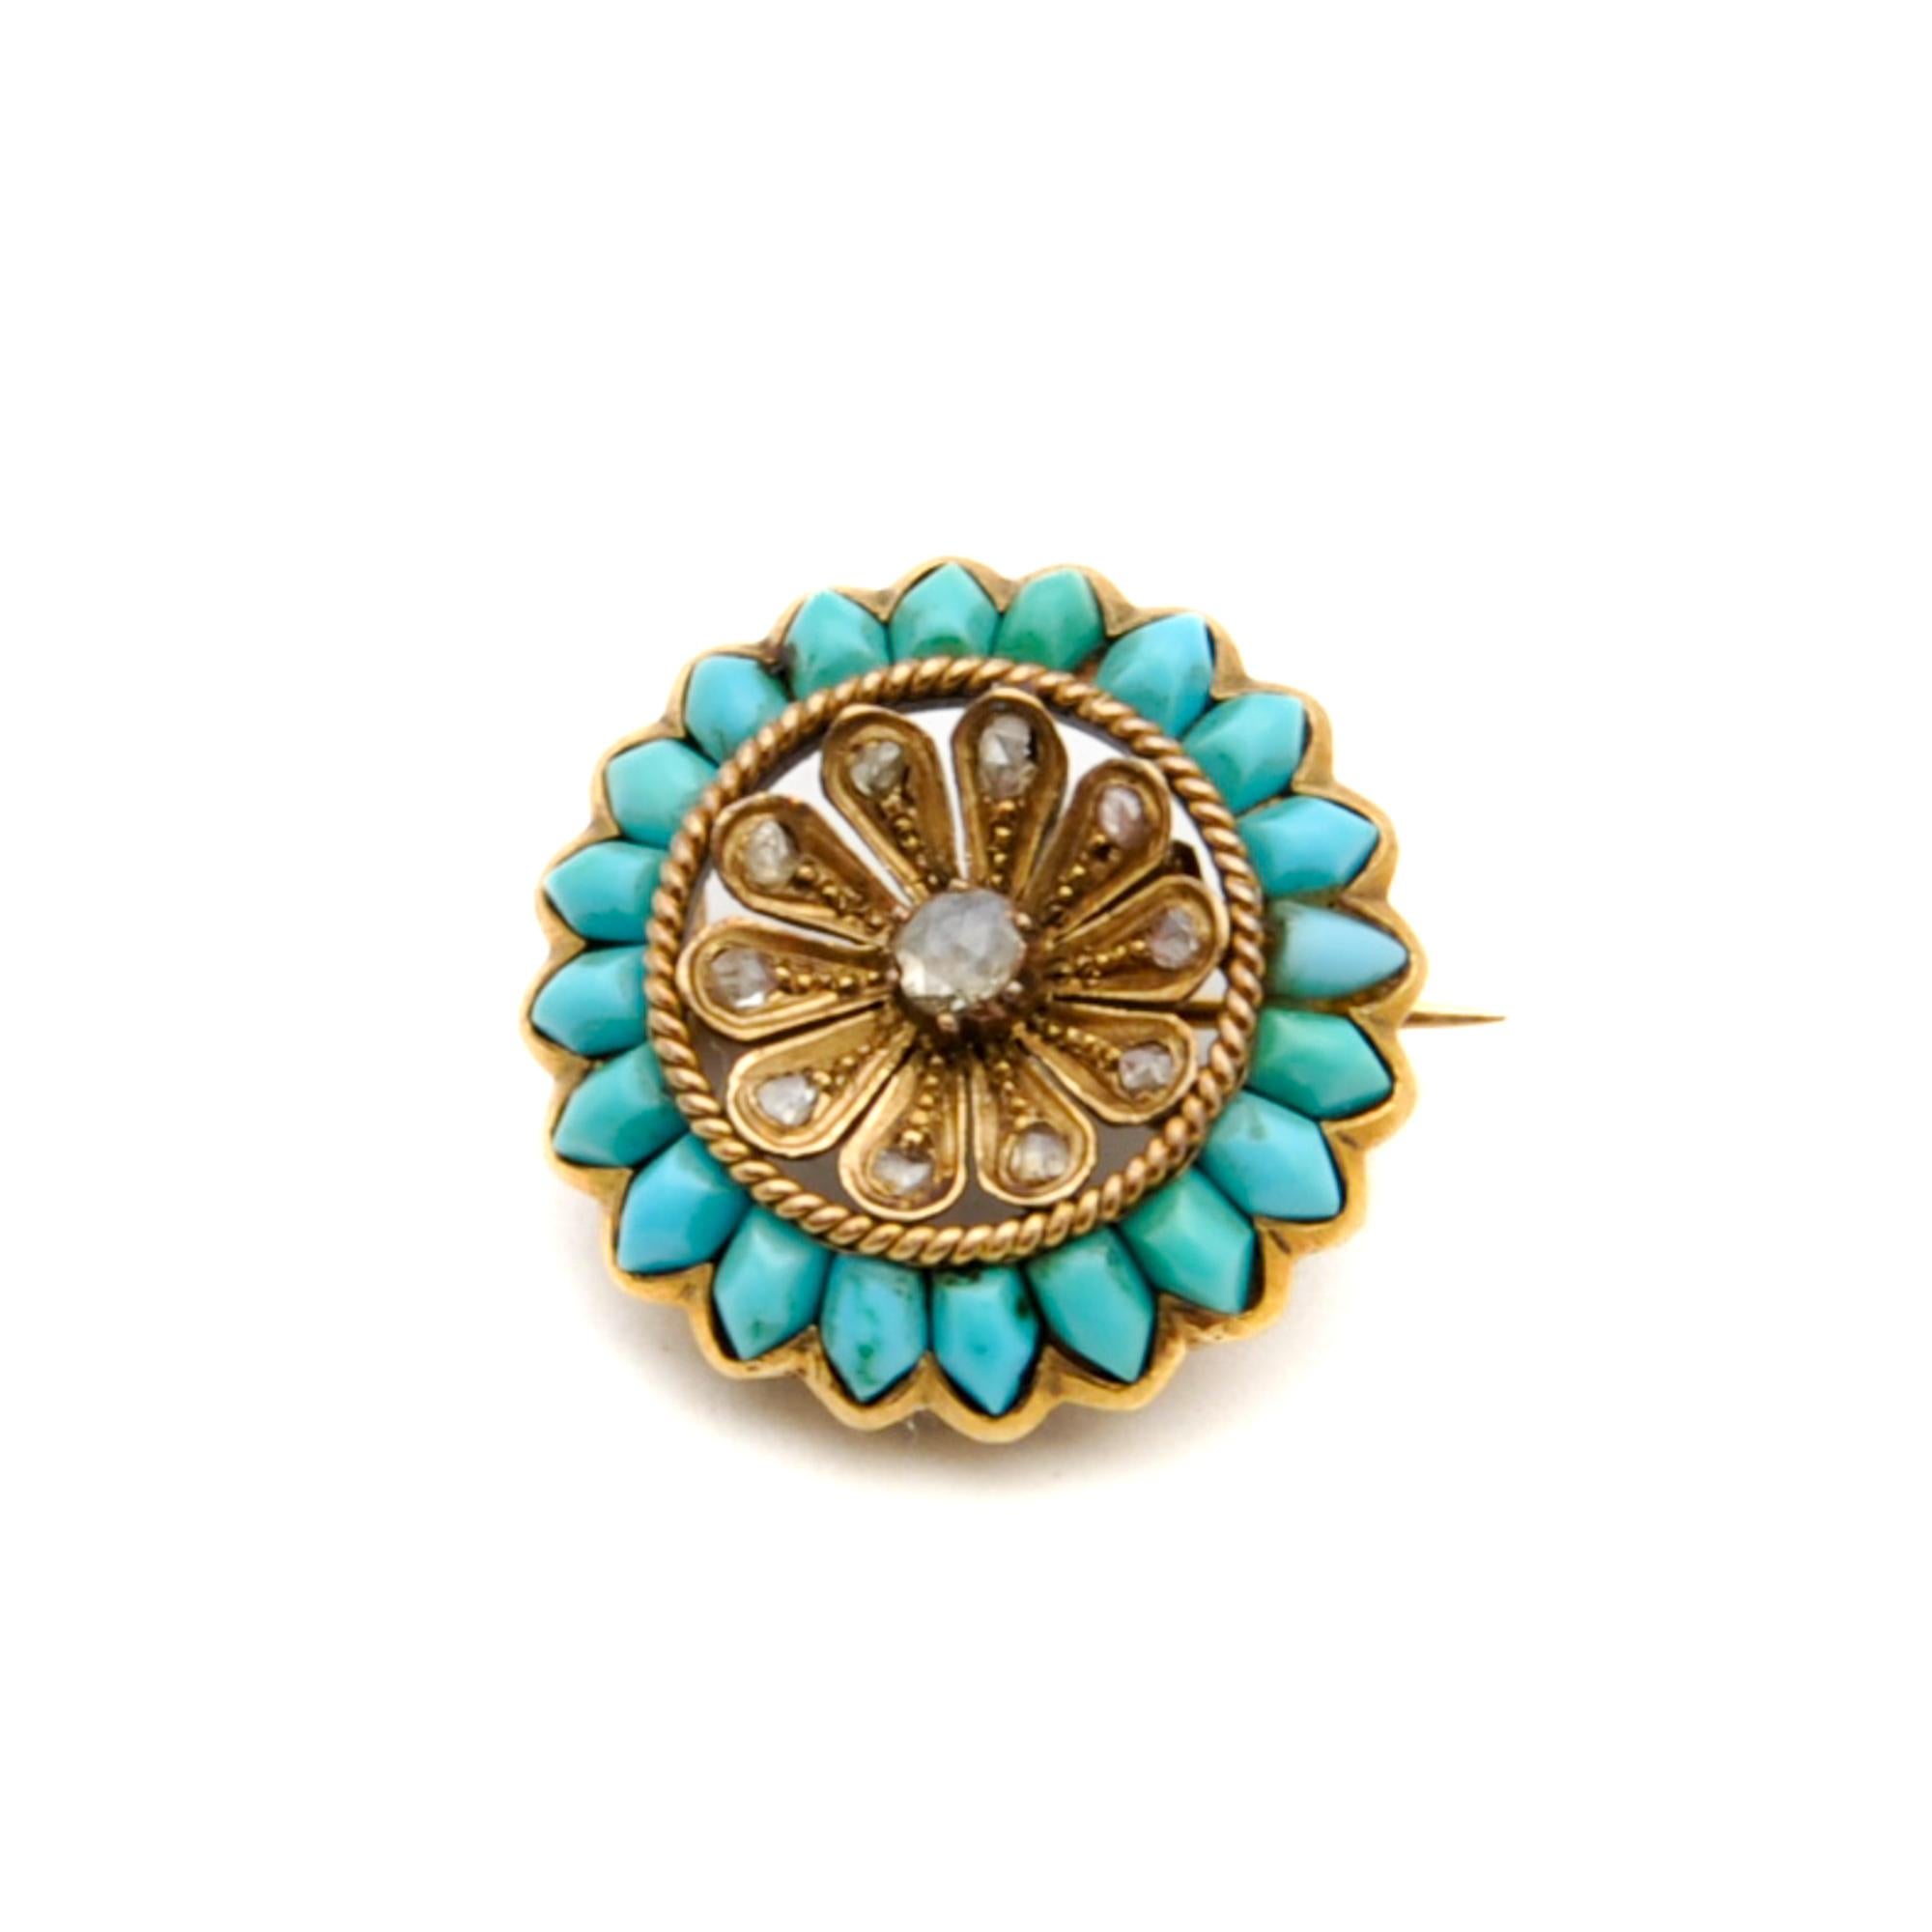 Women's or Men's Antique Victorian Rose Cut Diamond and Turquoise Flower Brooch For Sale